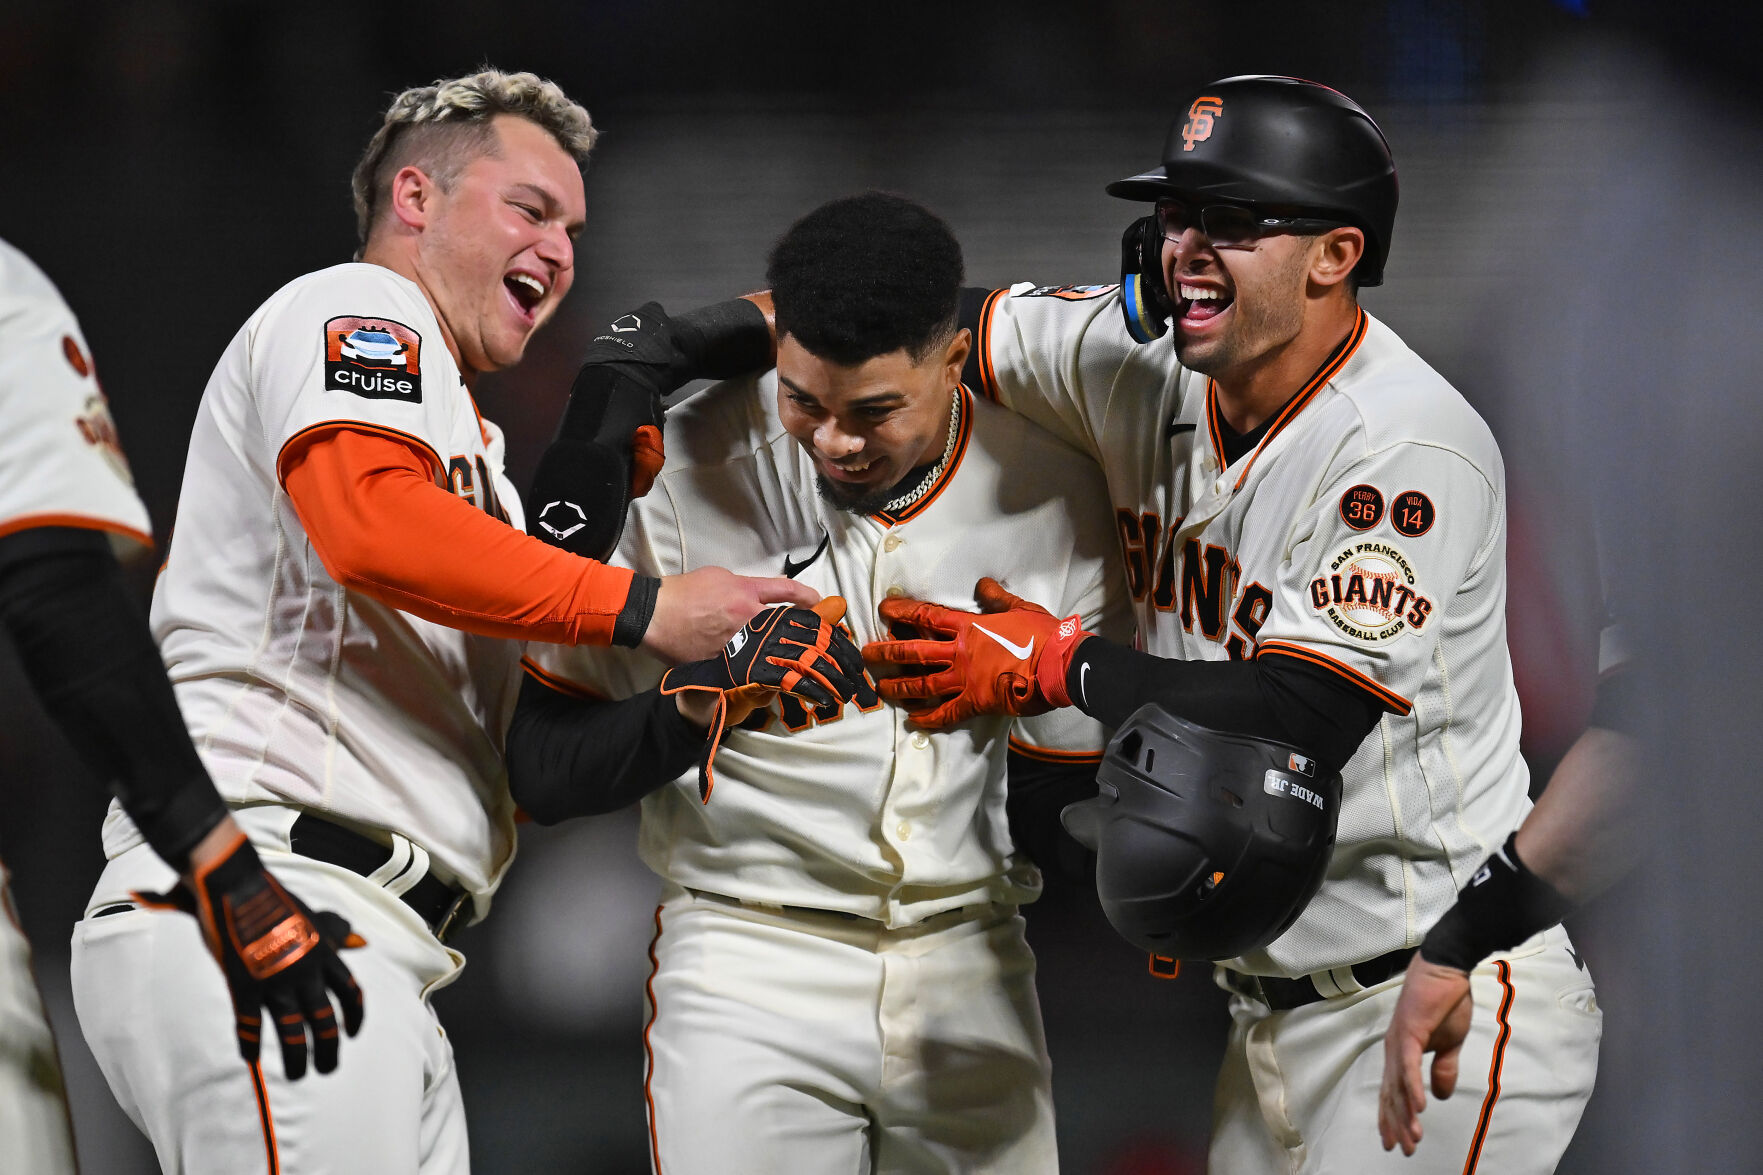 Despite miscues, SF Giants earn walk-off win to keep pace in NL wild card race Sports uniondemocrat